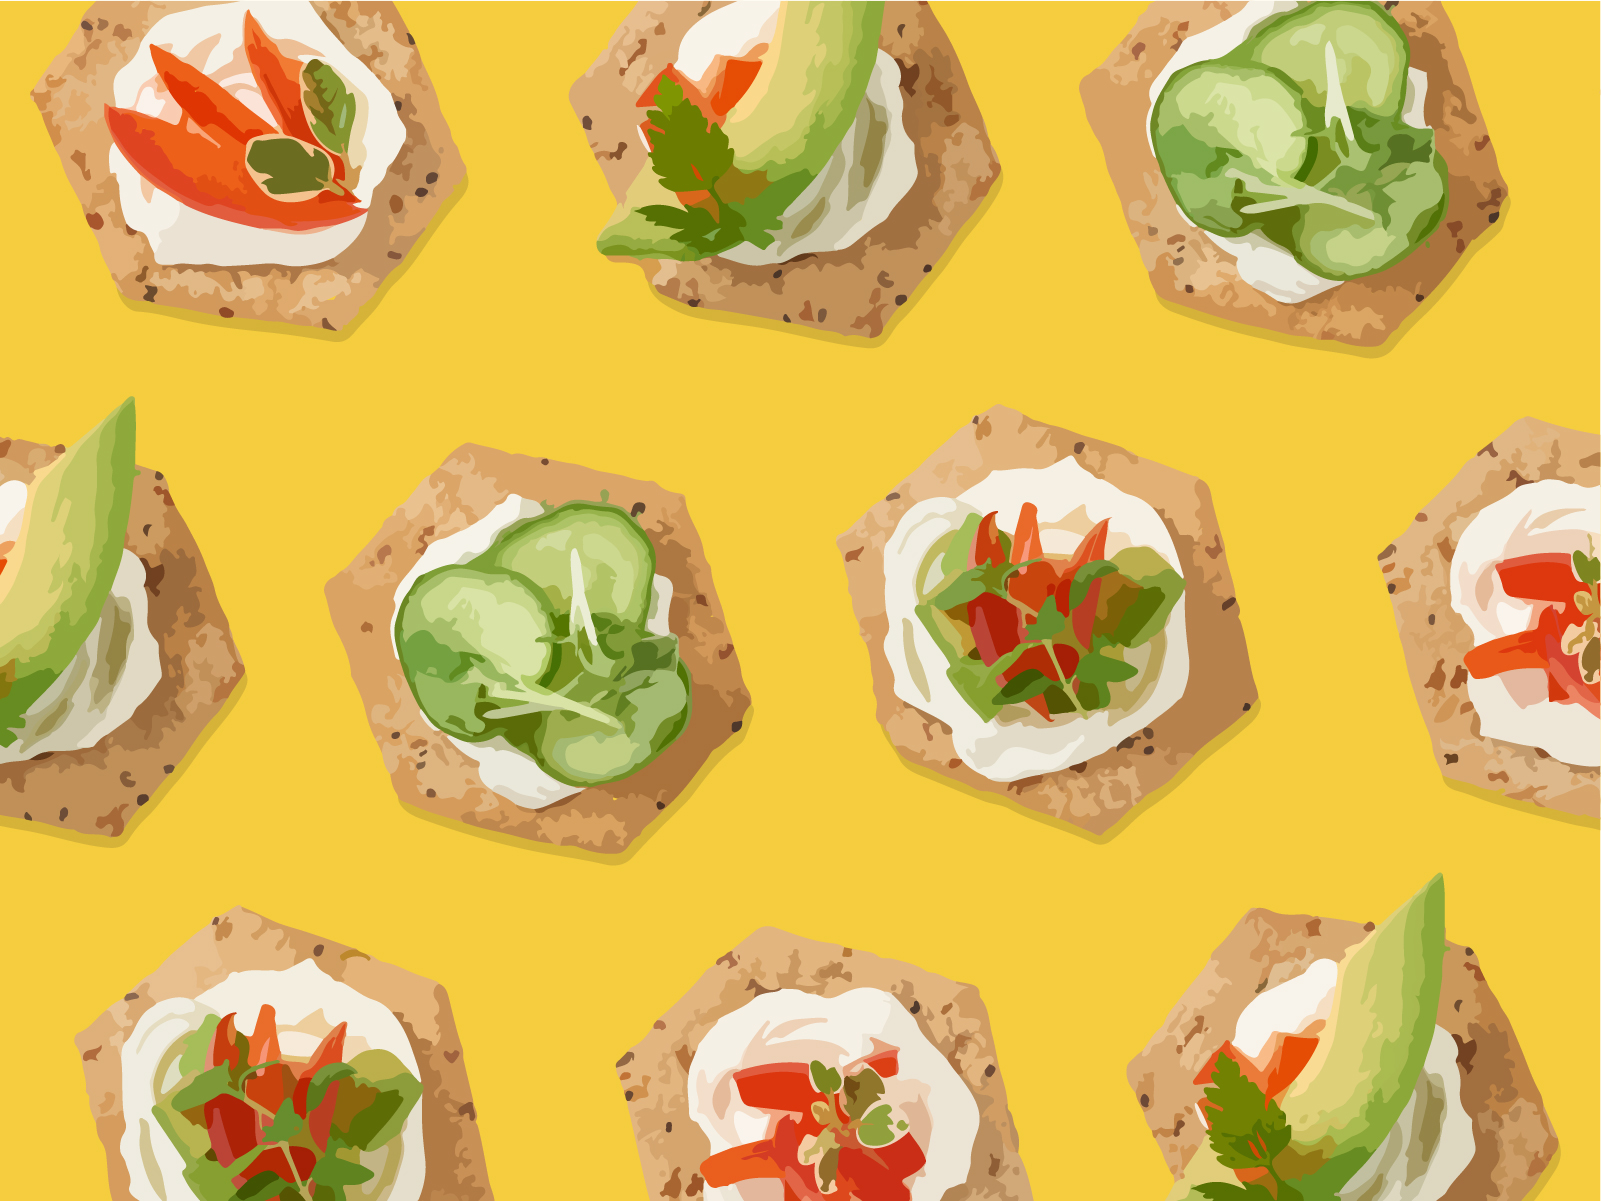 Illustration of sprouted seed crackers with various toppings on yellow background 